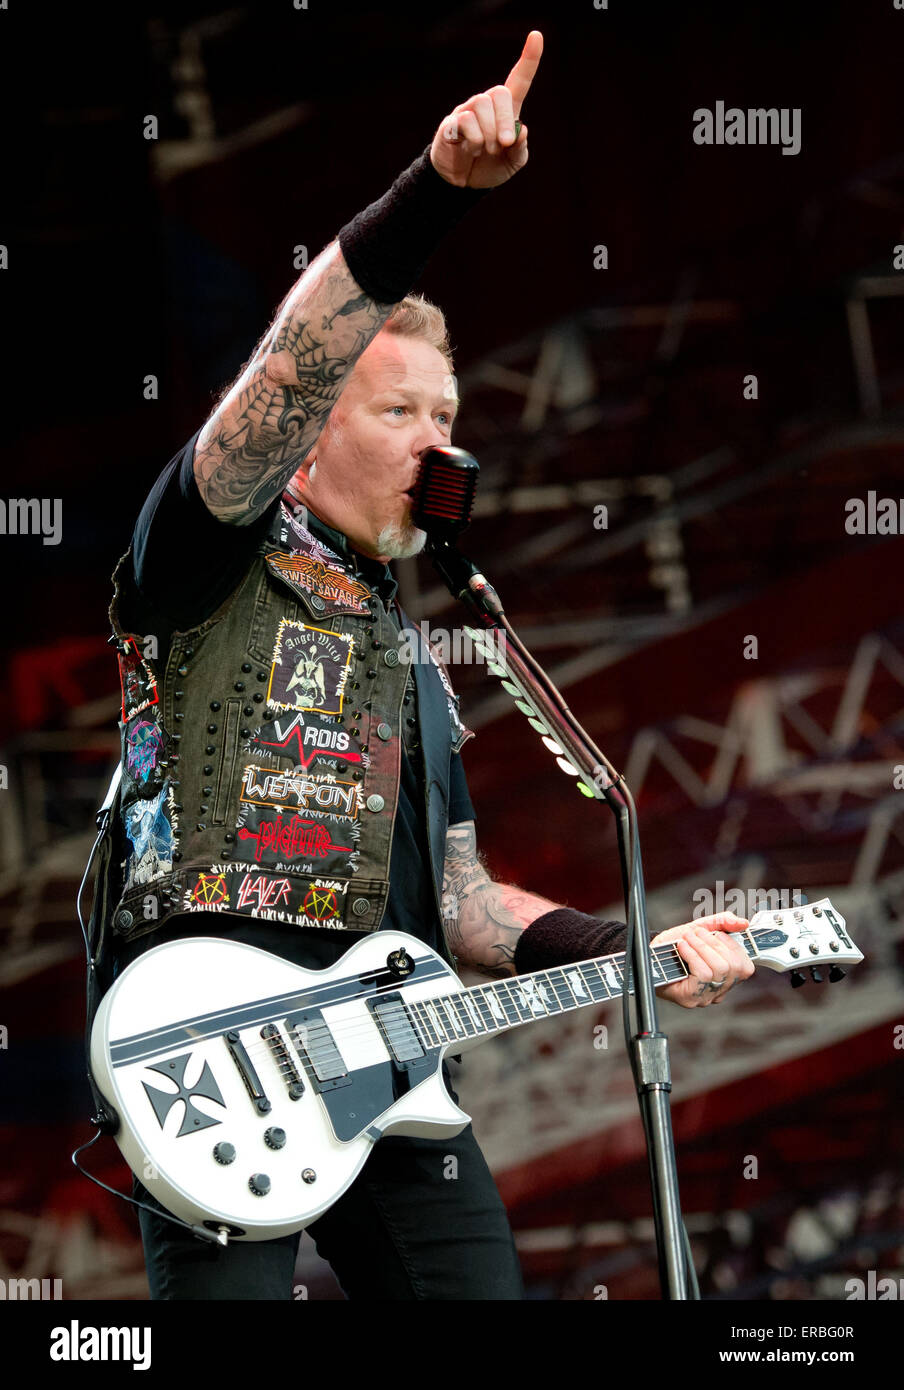 Singer and guitarist James Hetfield of the US rock band Metallica  performs on stage during the  Rockavaria Music Festival in Munich, Germany, 31 May 2015. Photo: Sven Hoppe/dpa Stock Photo